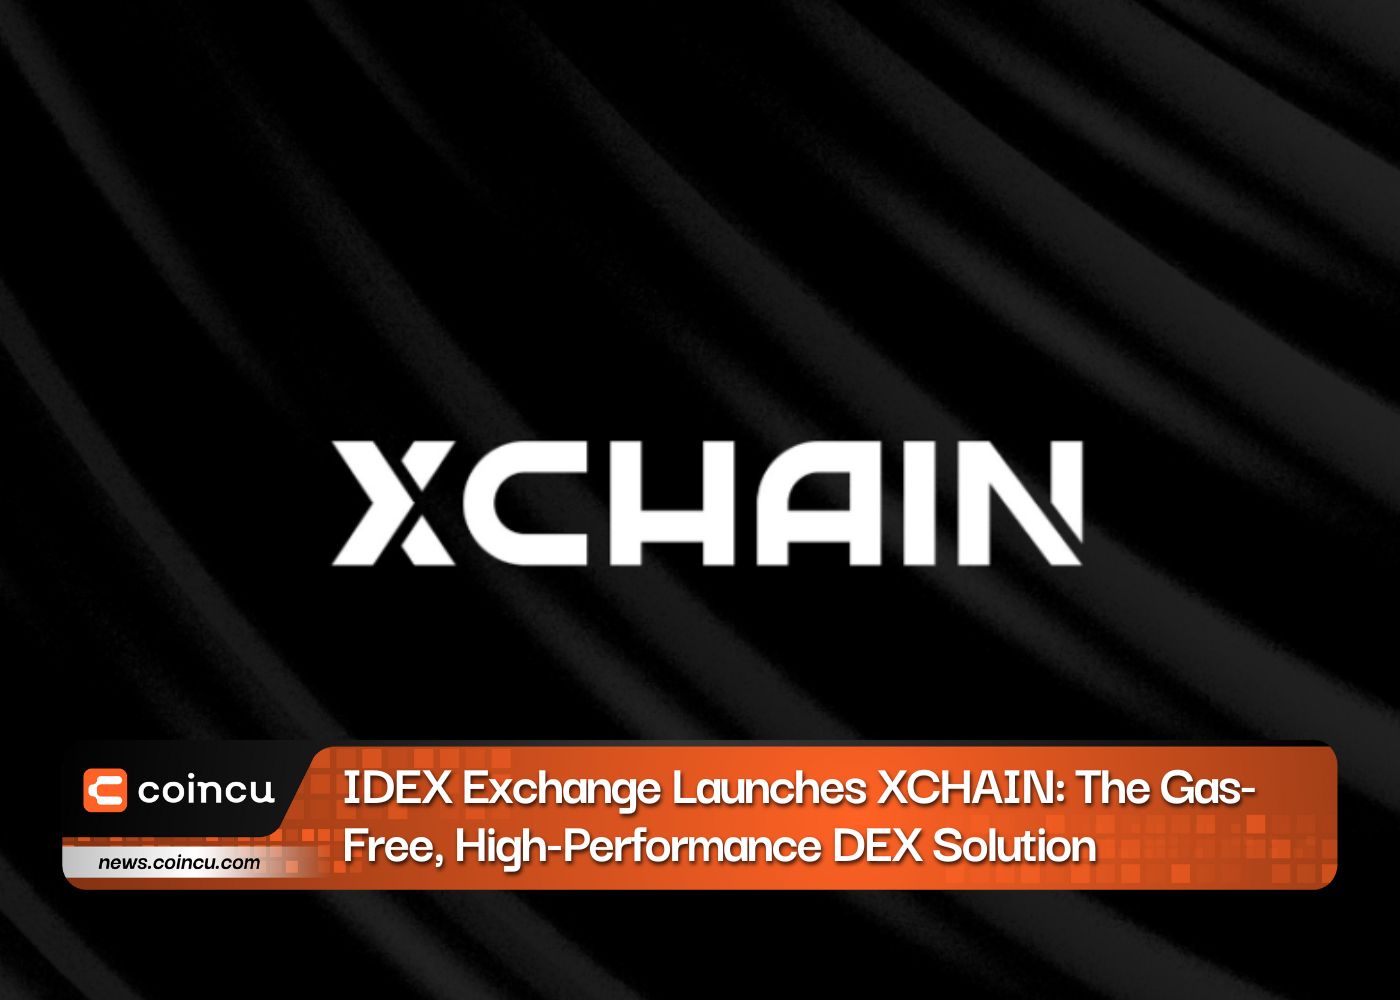 IDEX Exchange Launches XCHAIN: The Gas-Free, High-Performance DEX Solution